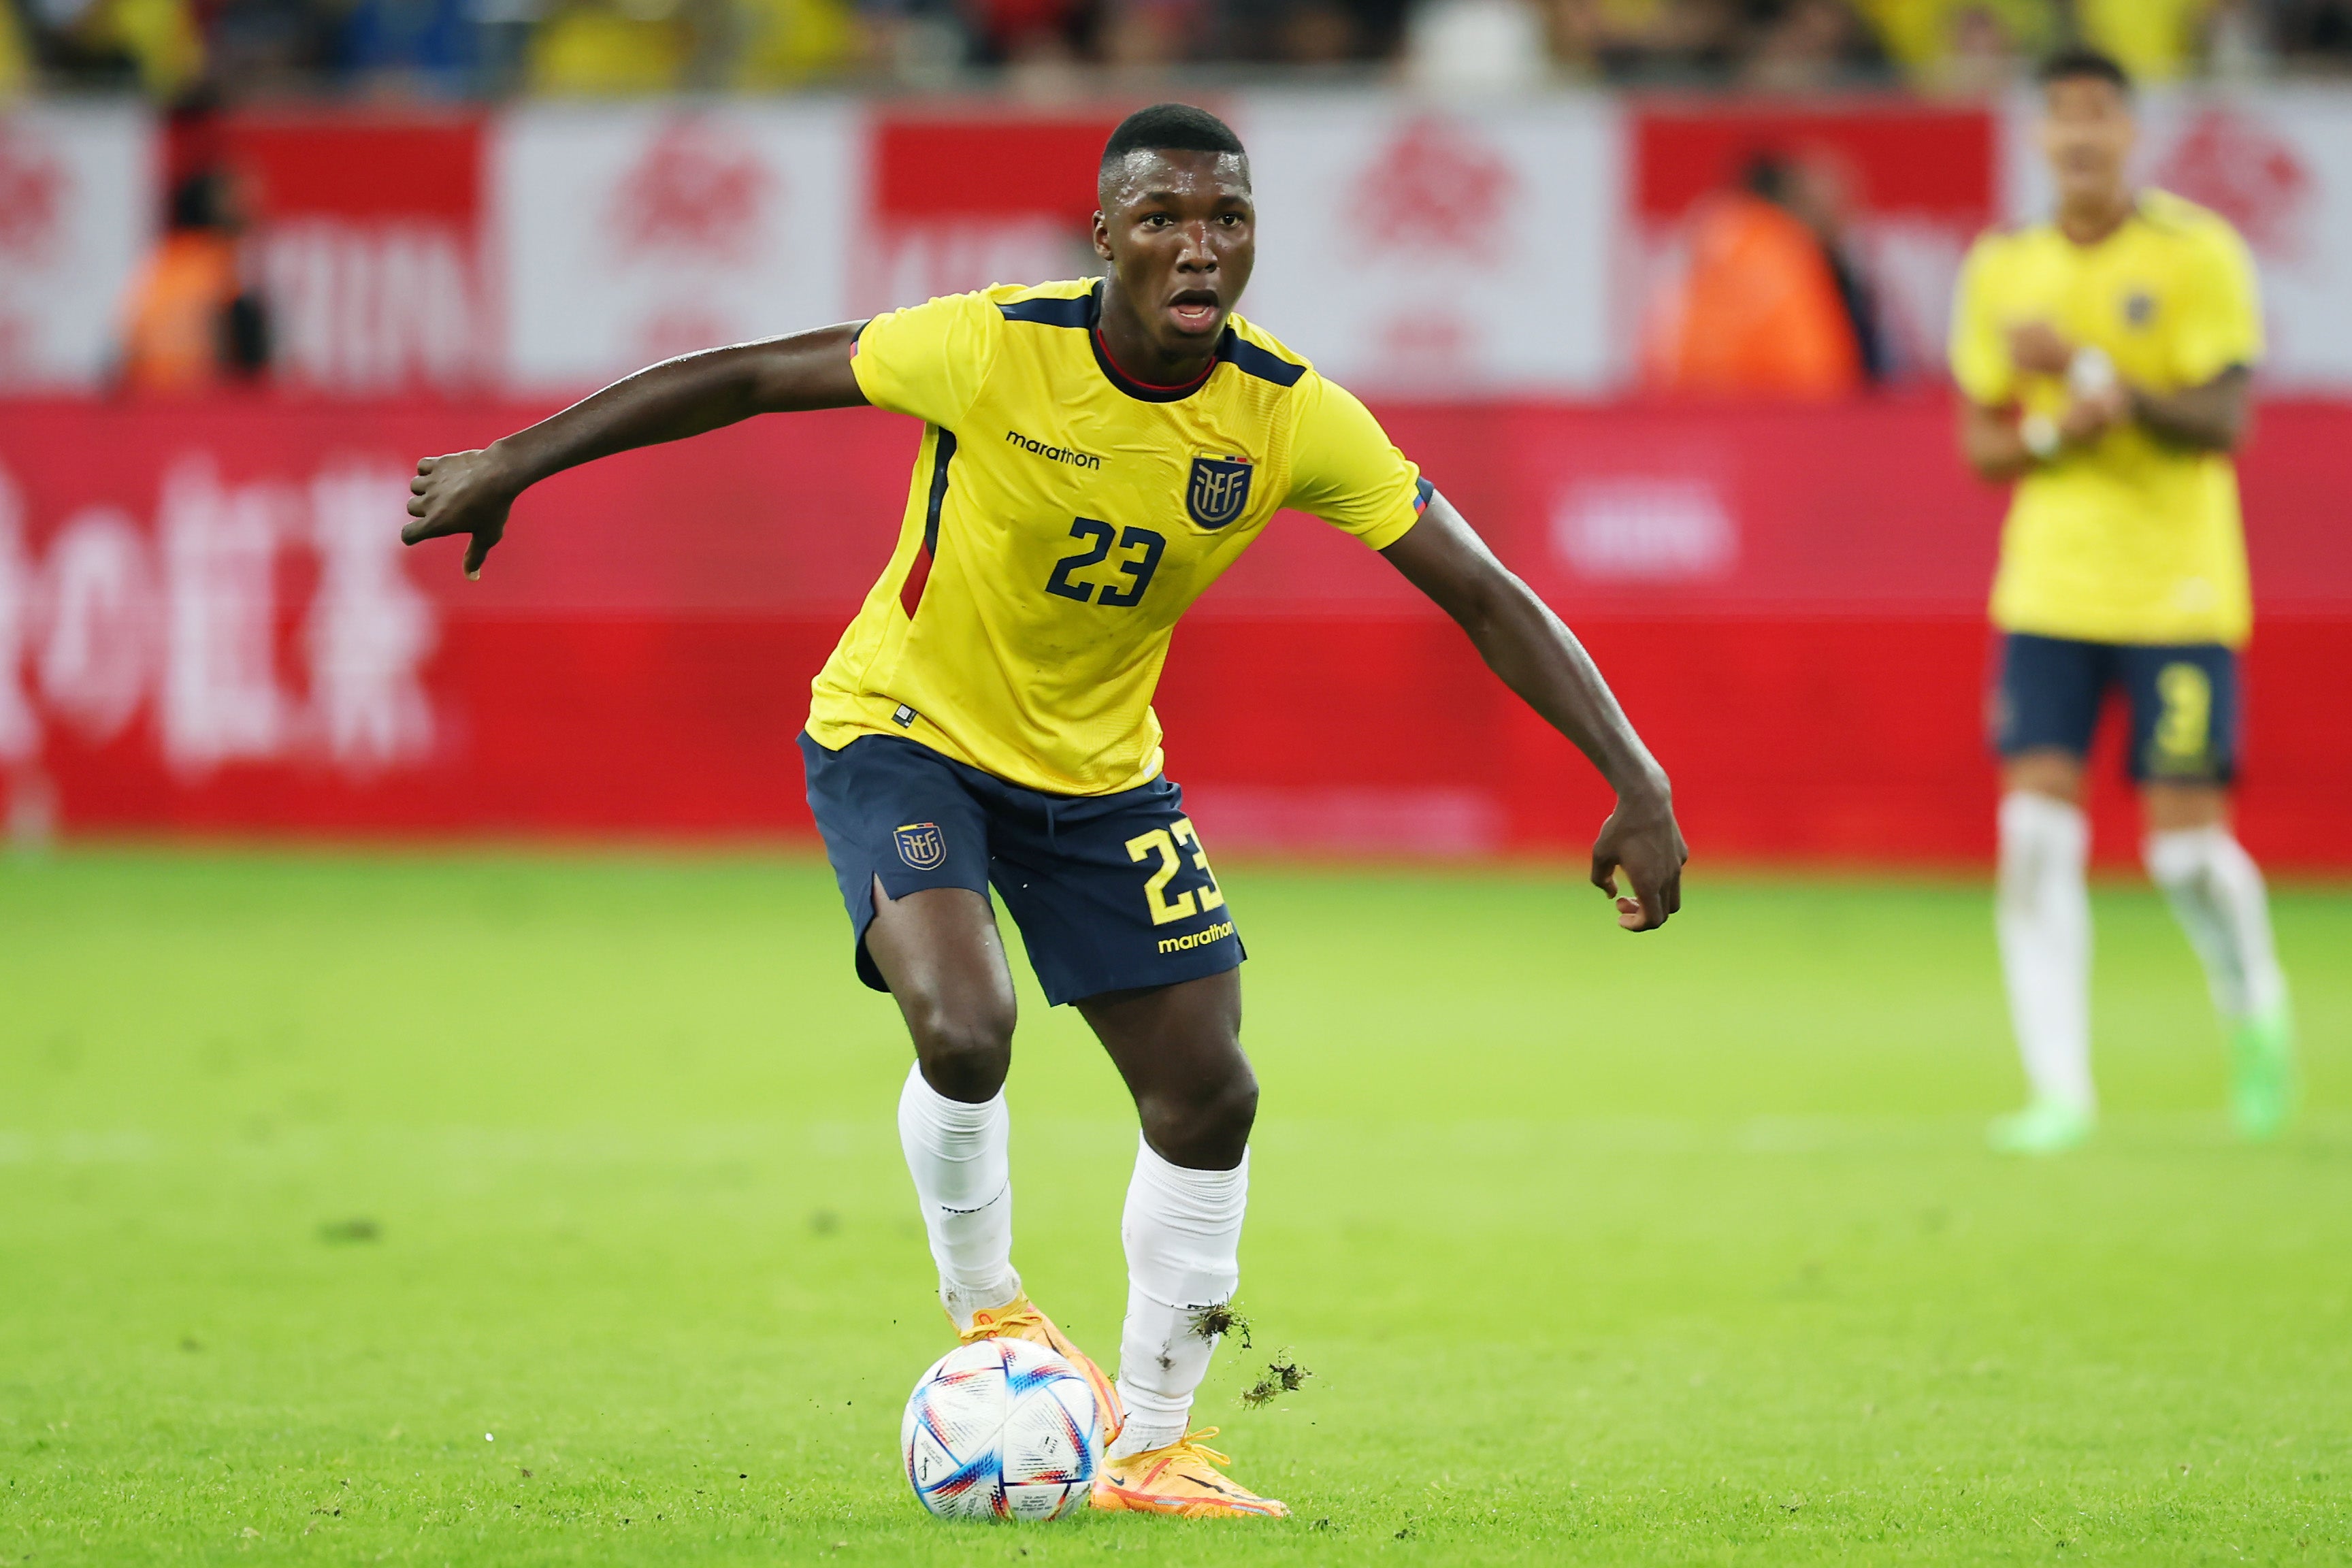 Caicedo became a commanding midfield presence during Ecuador’s arduous, two-year South American qualifying campaign